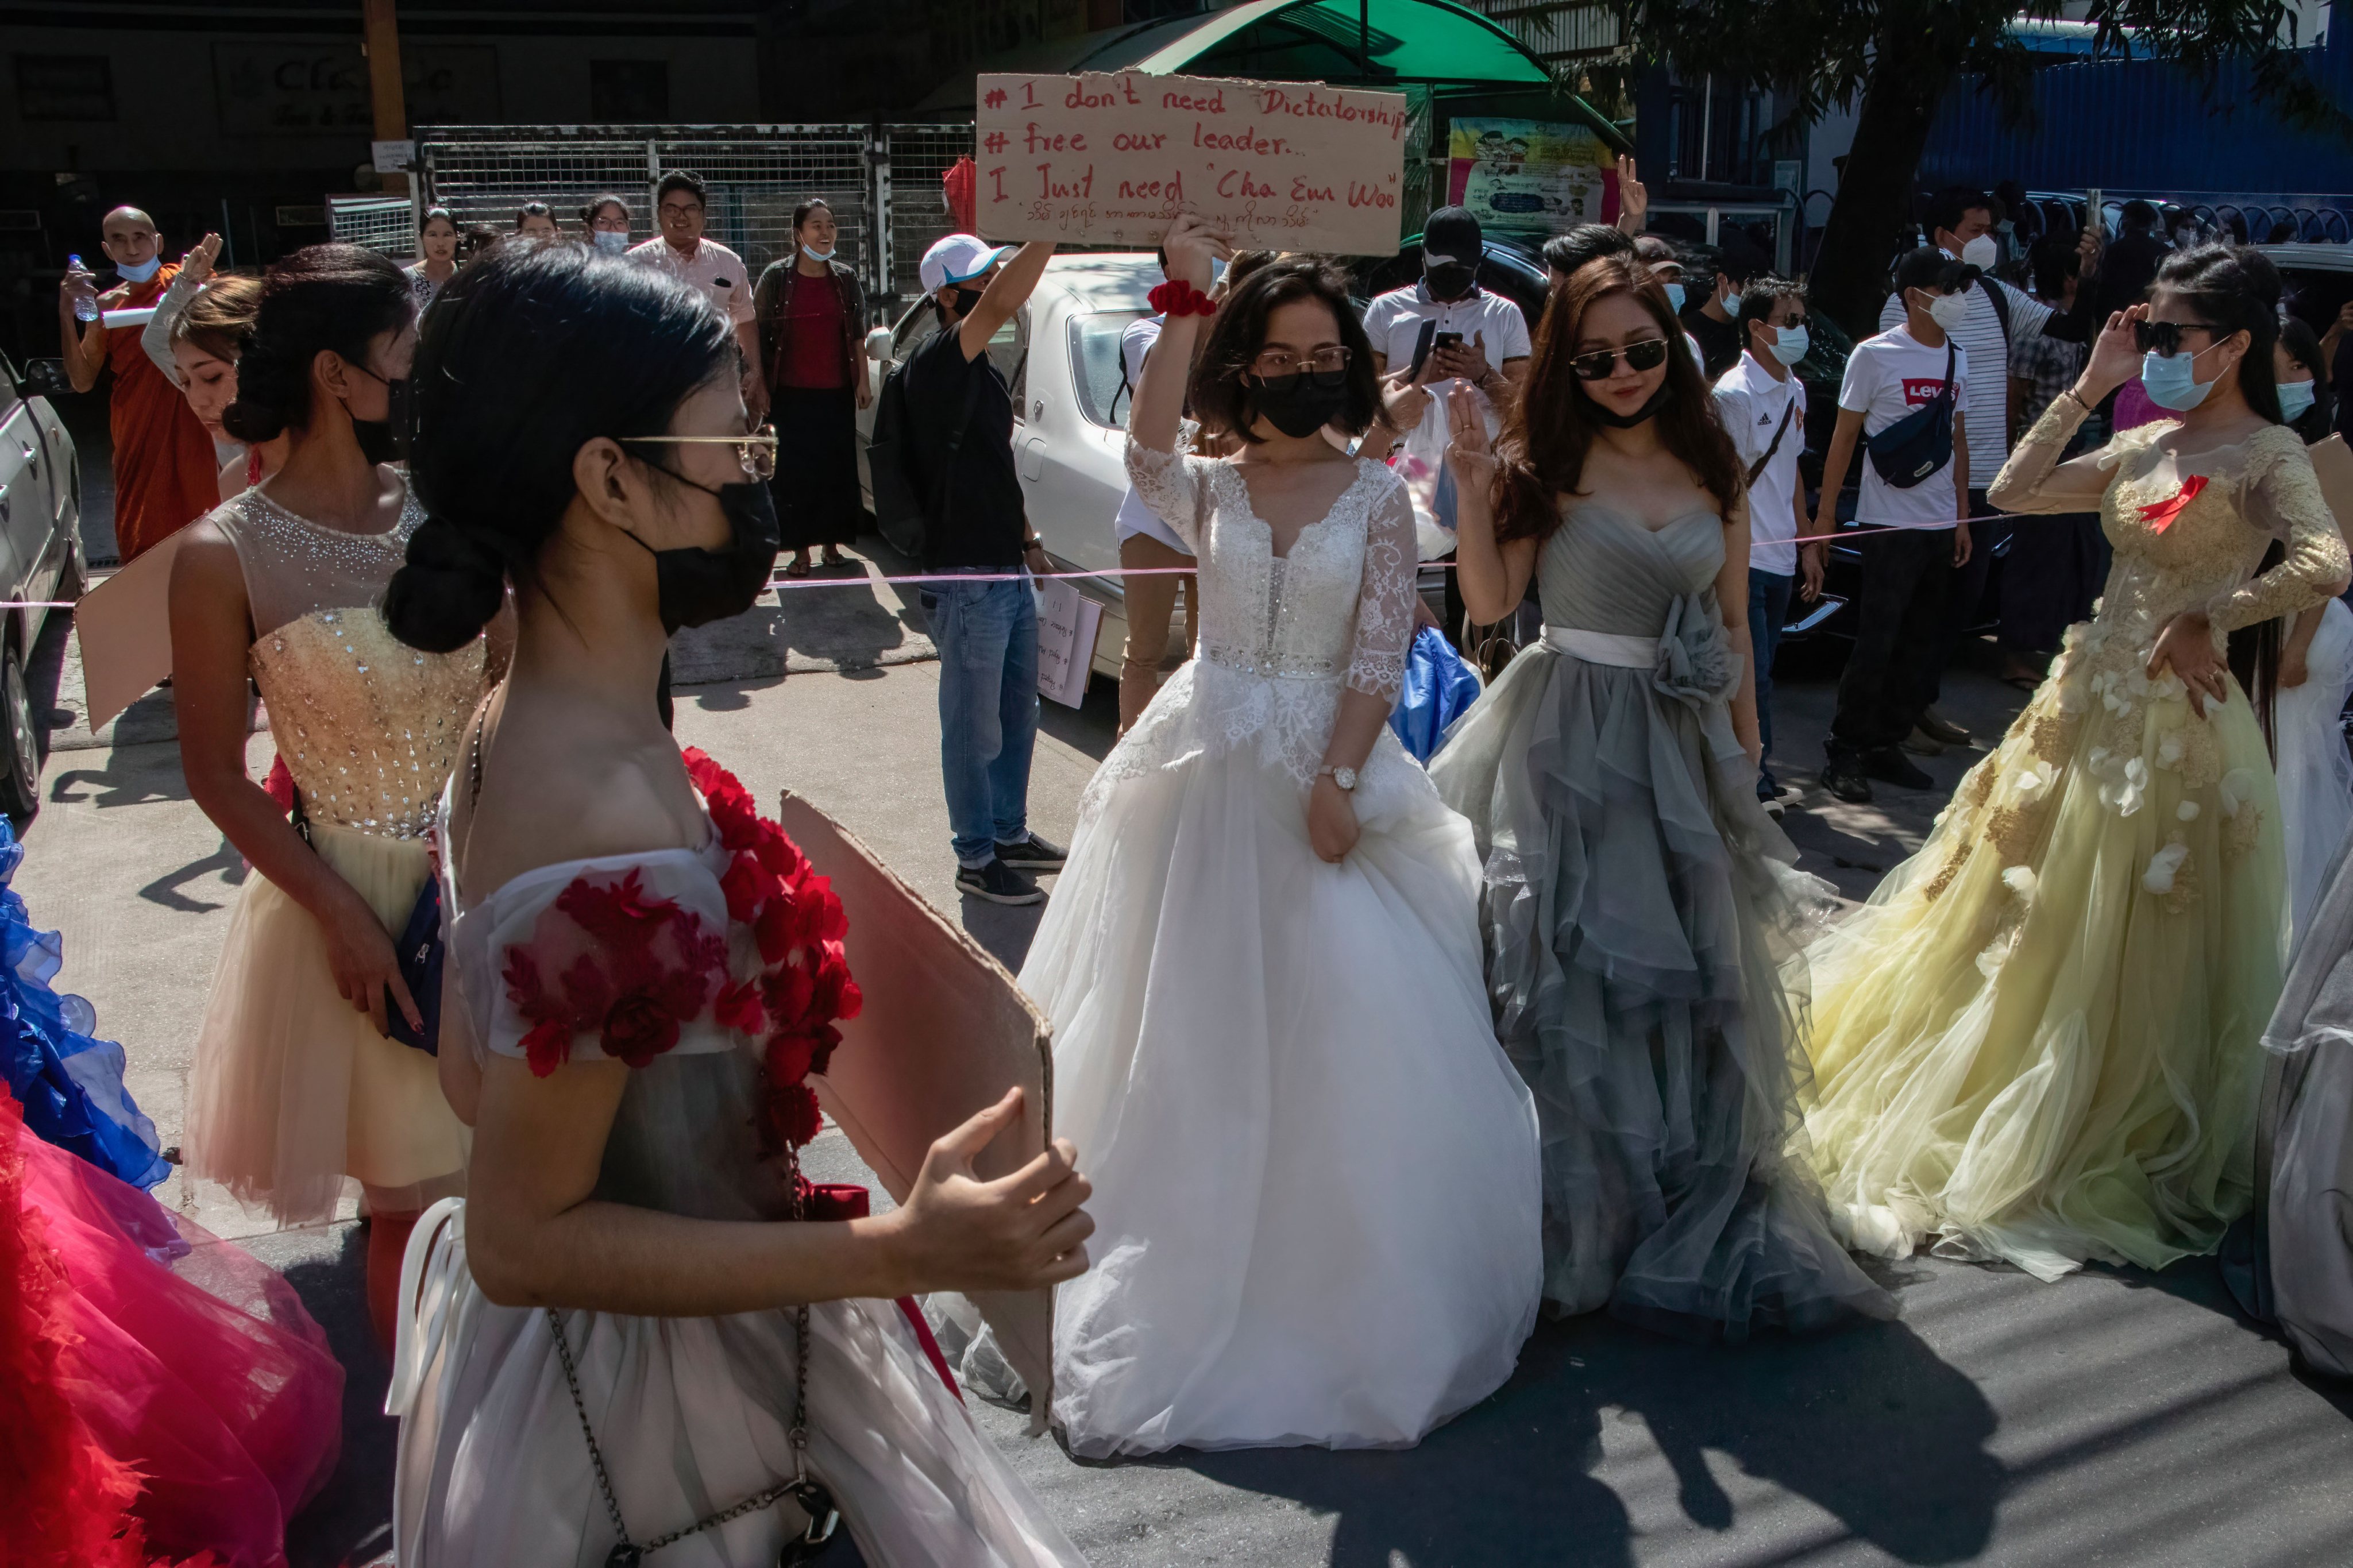 Protesters wearing wedding gowns march on the streets